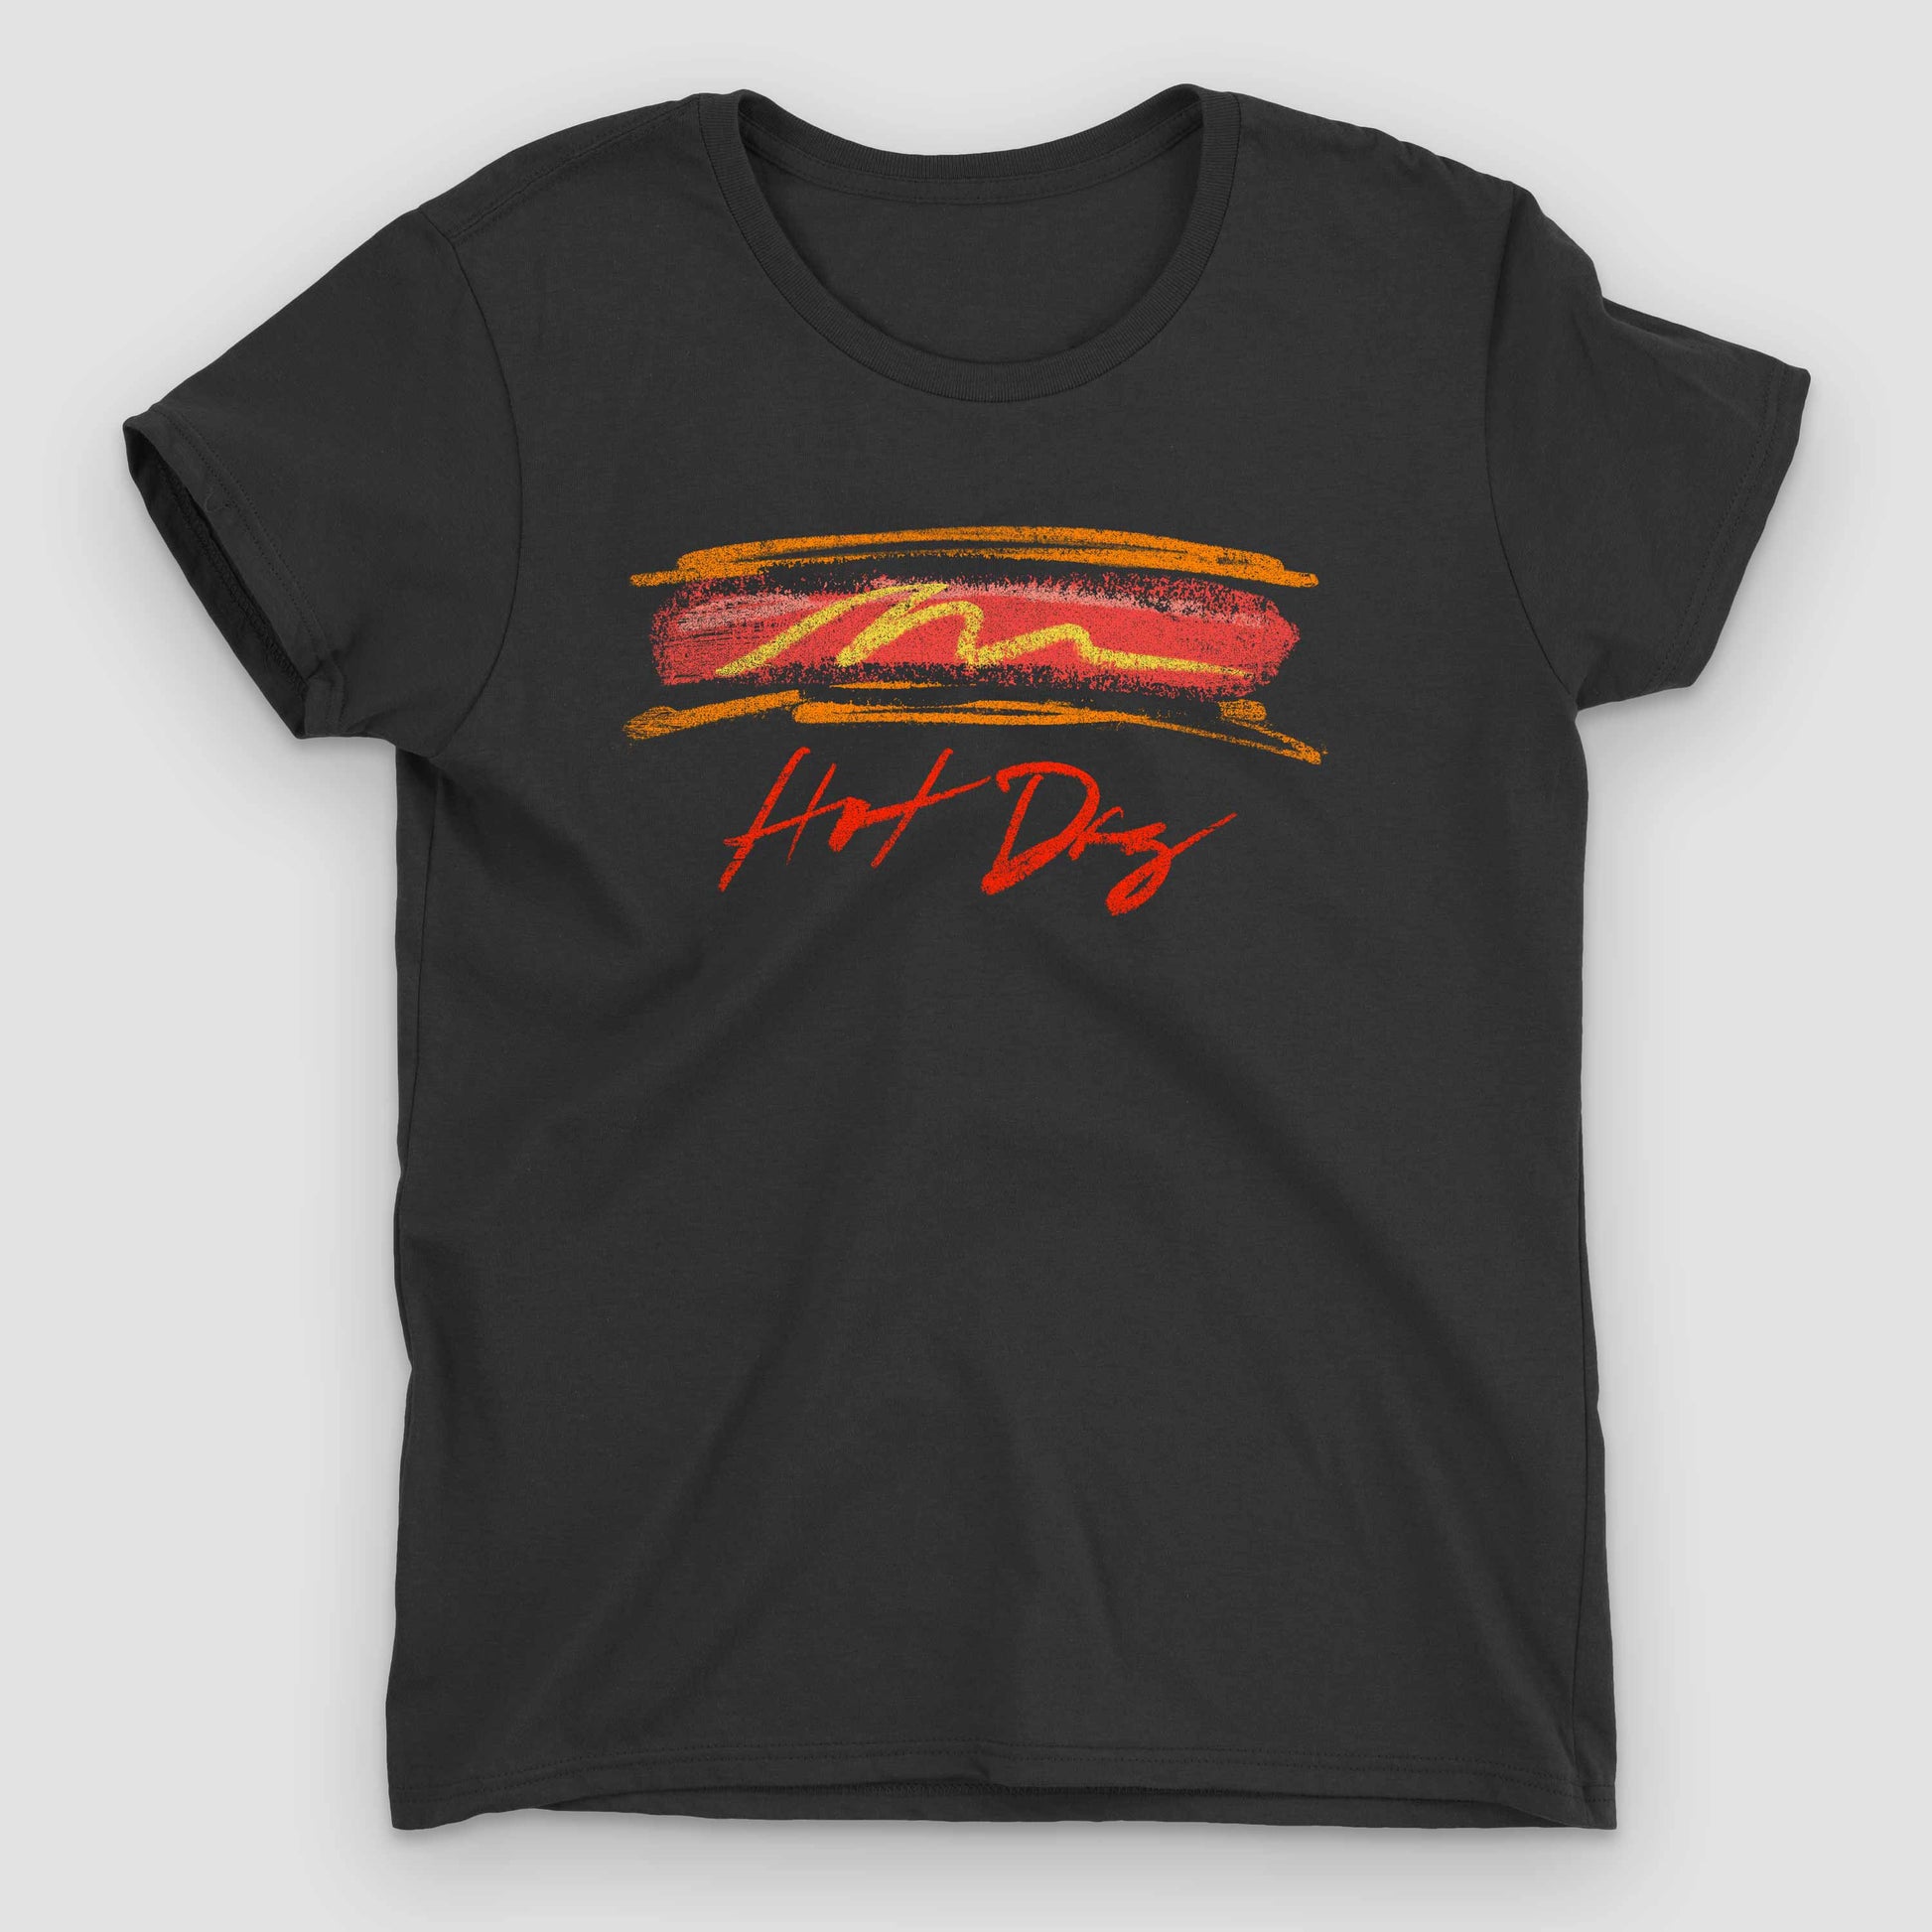  Hot Dog Women's Graphic T-Shirt by Snaxtime